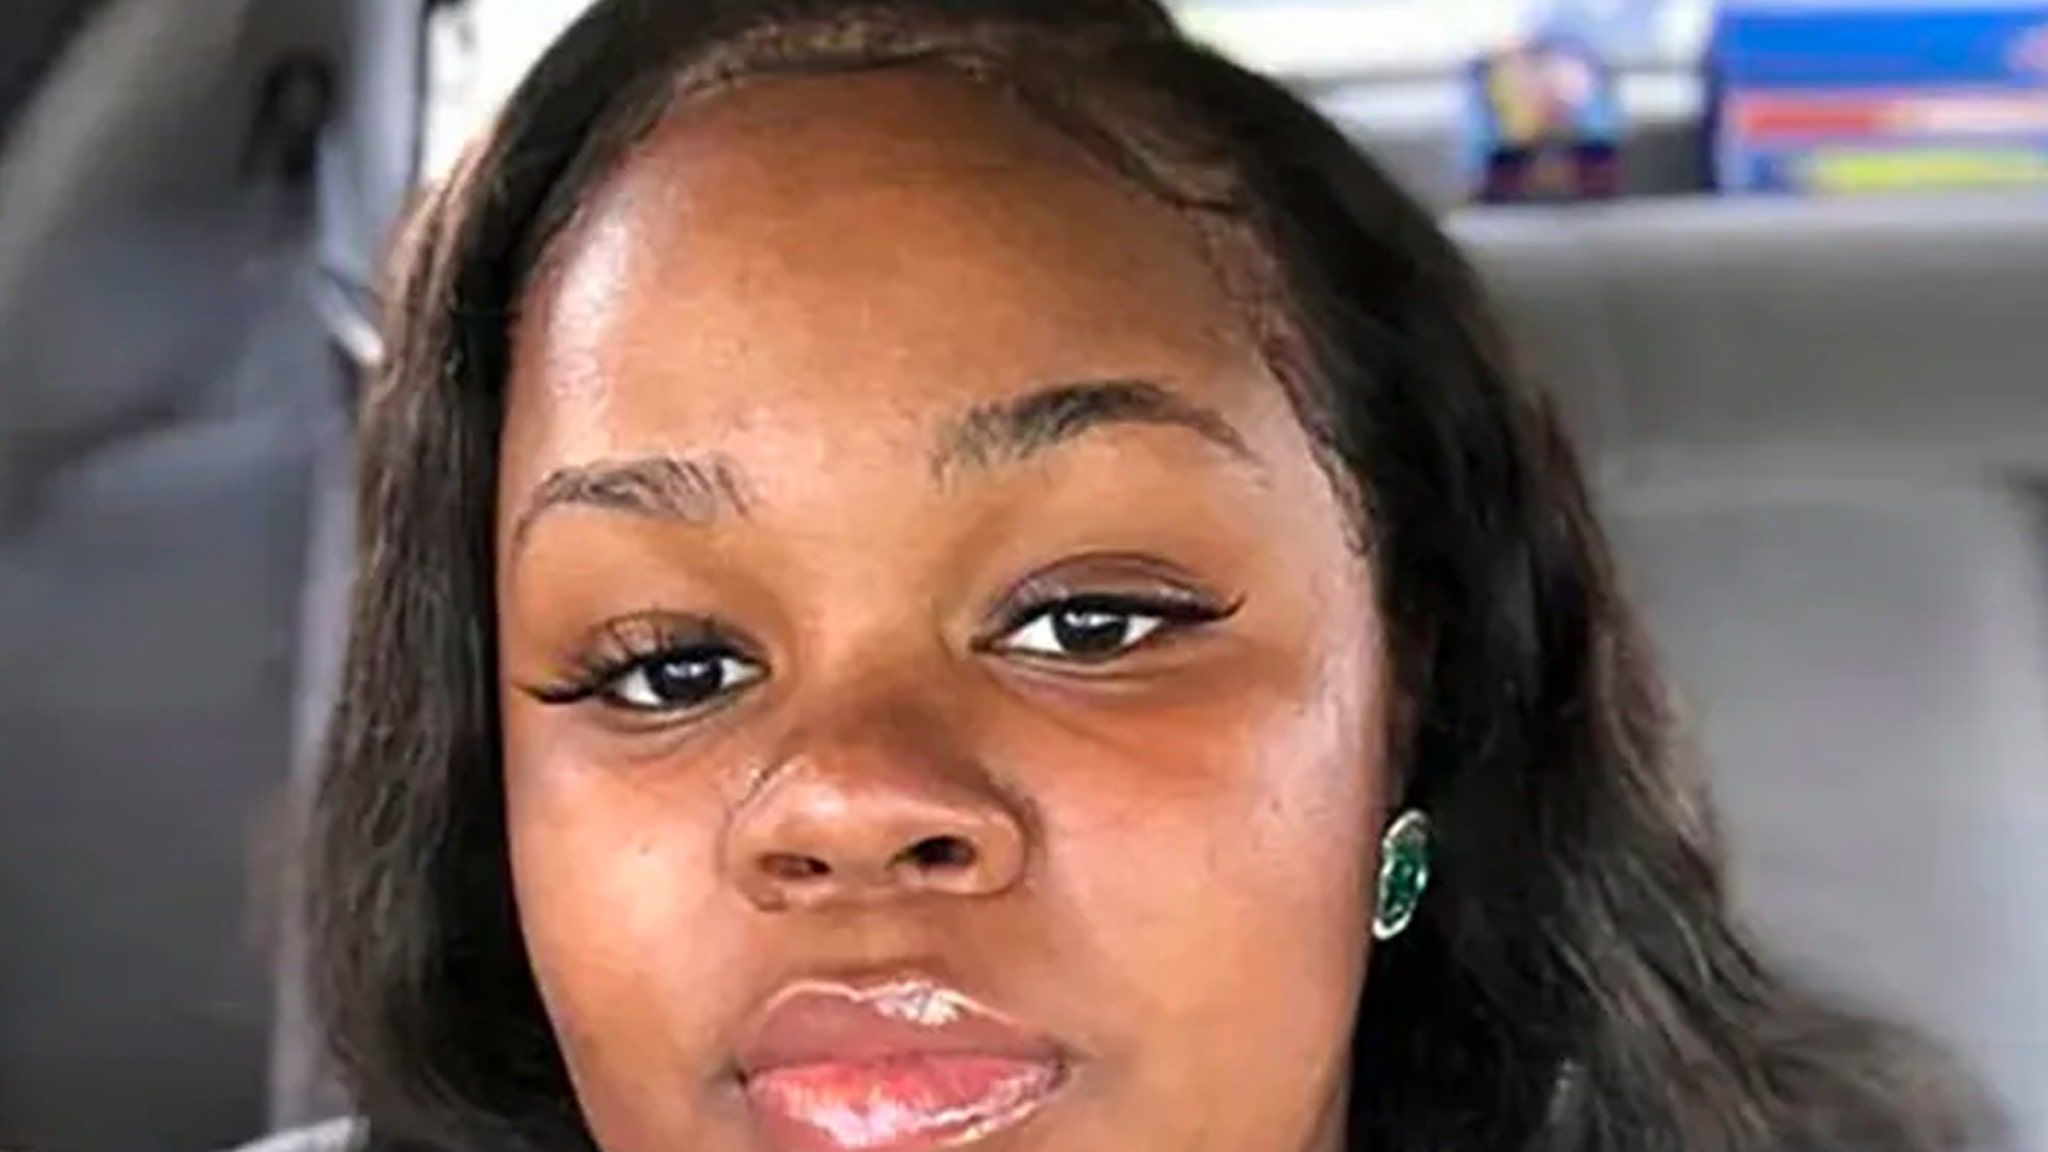 4 Cops Charged in Connection to Raid that Killed Breonna Taylor